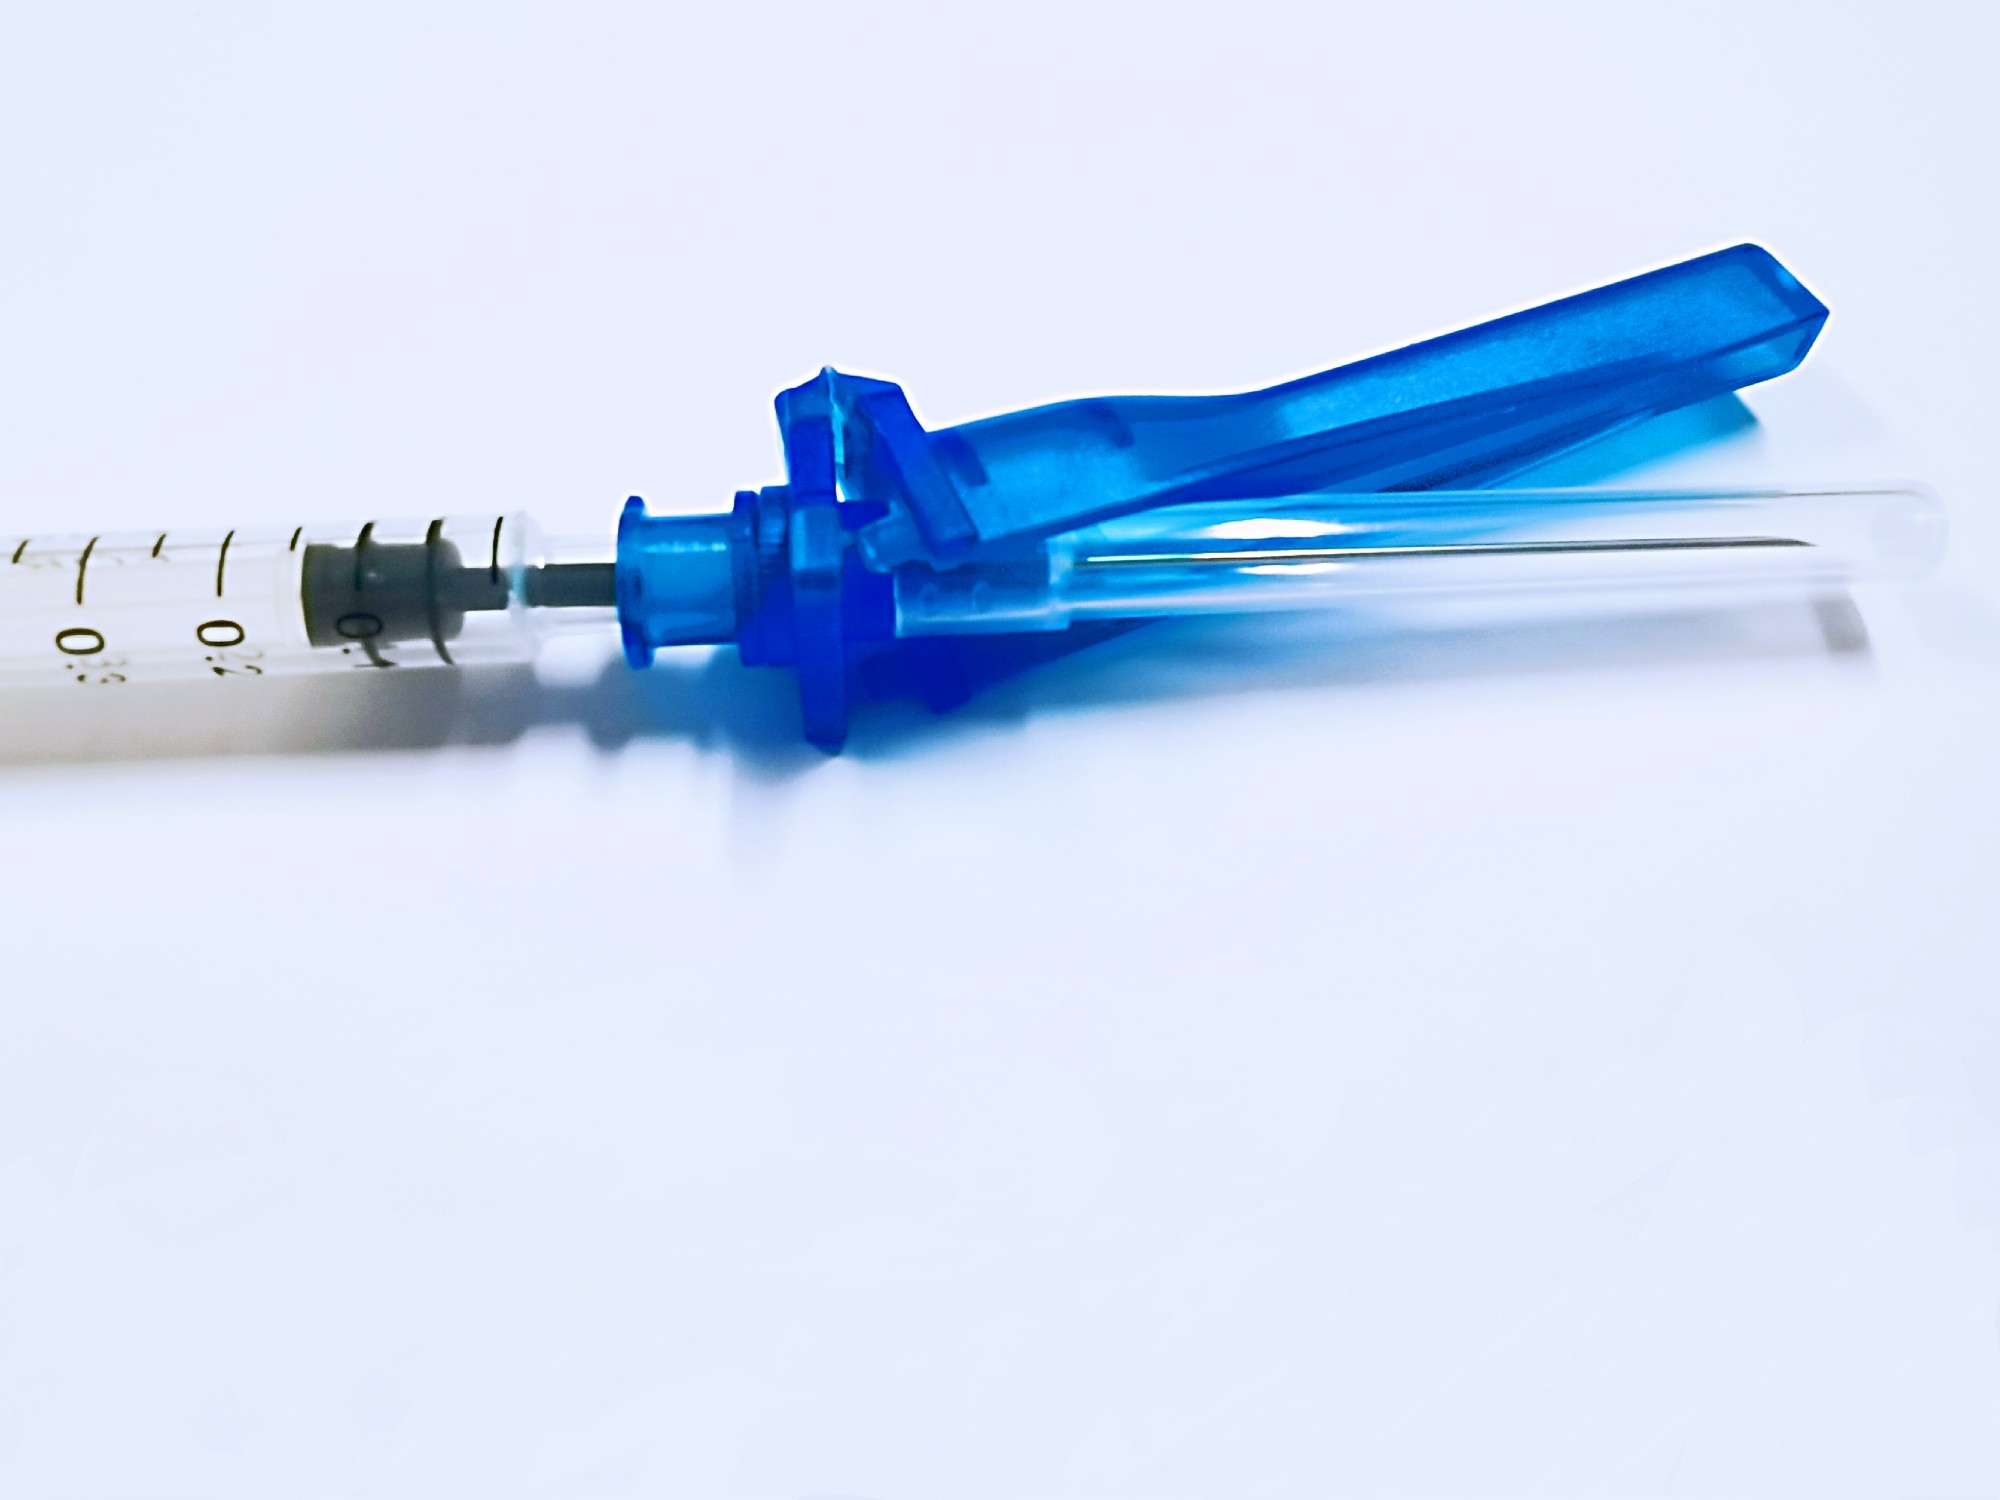 Disposable syringe with safety needle